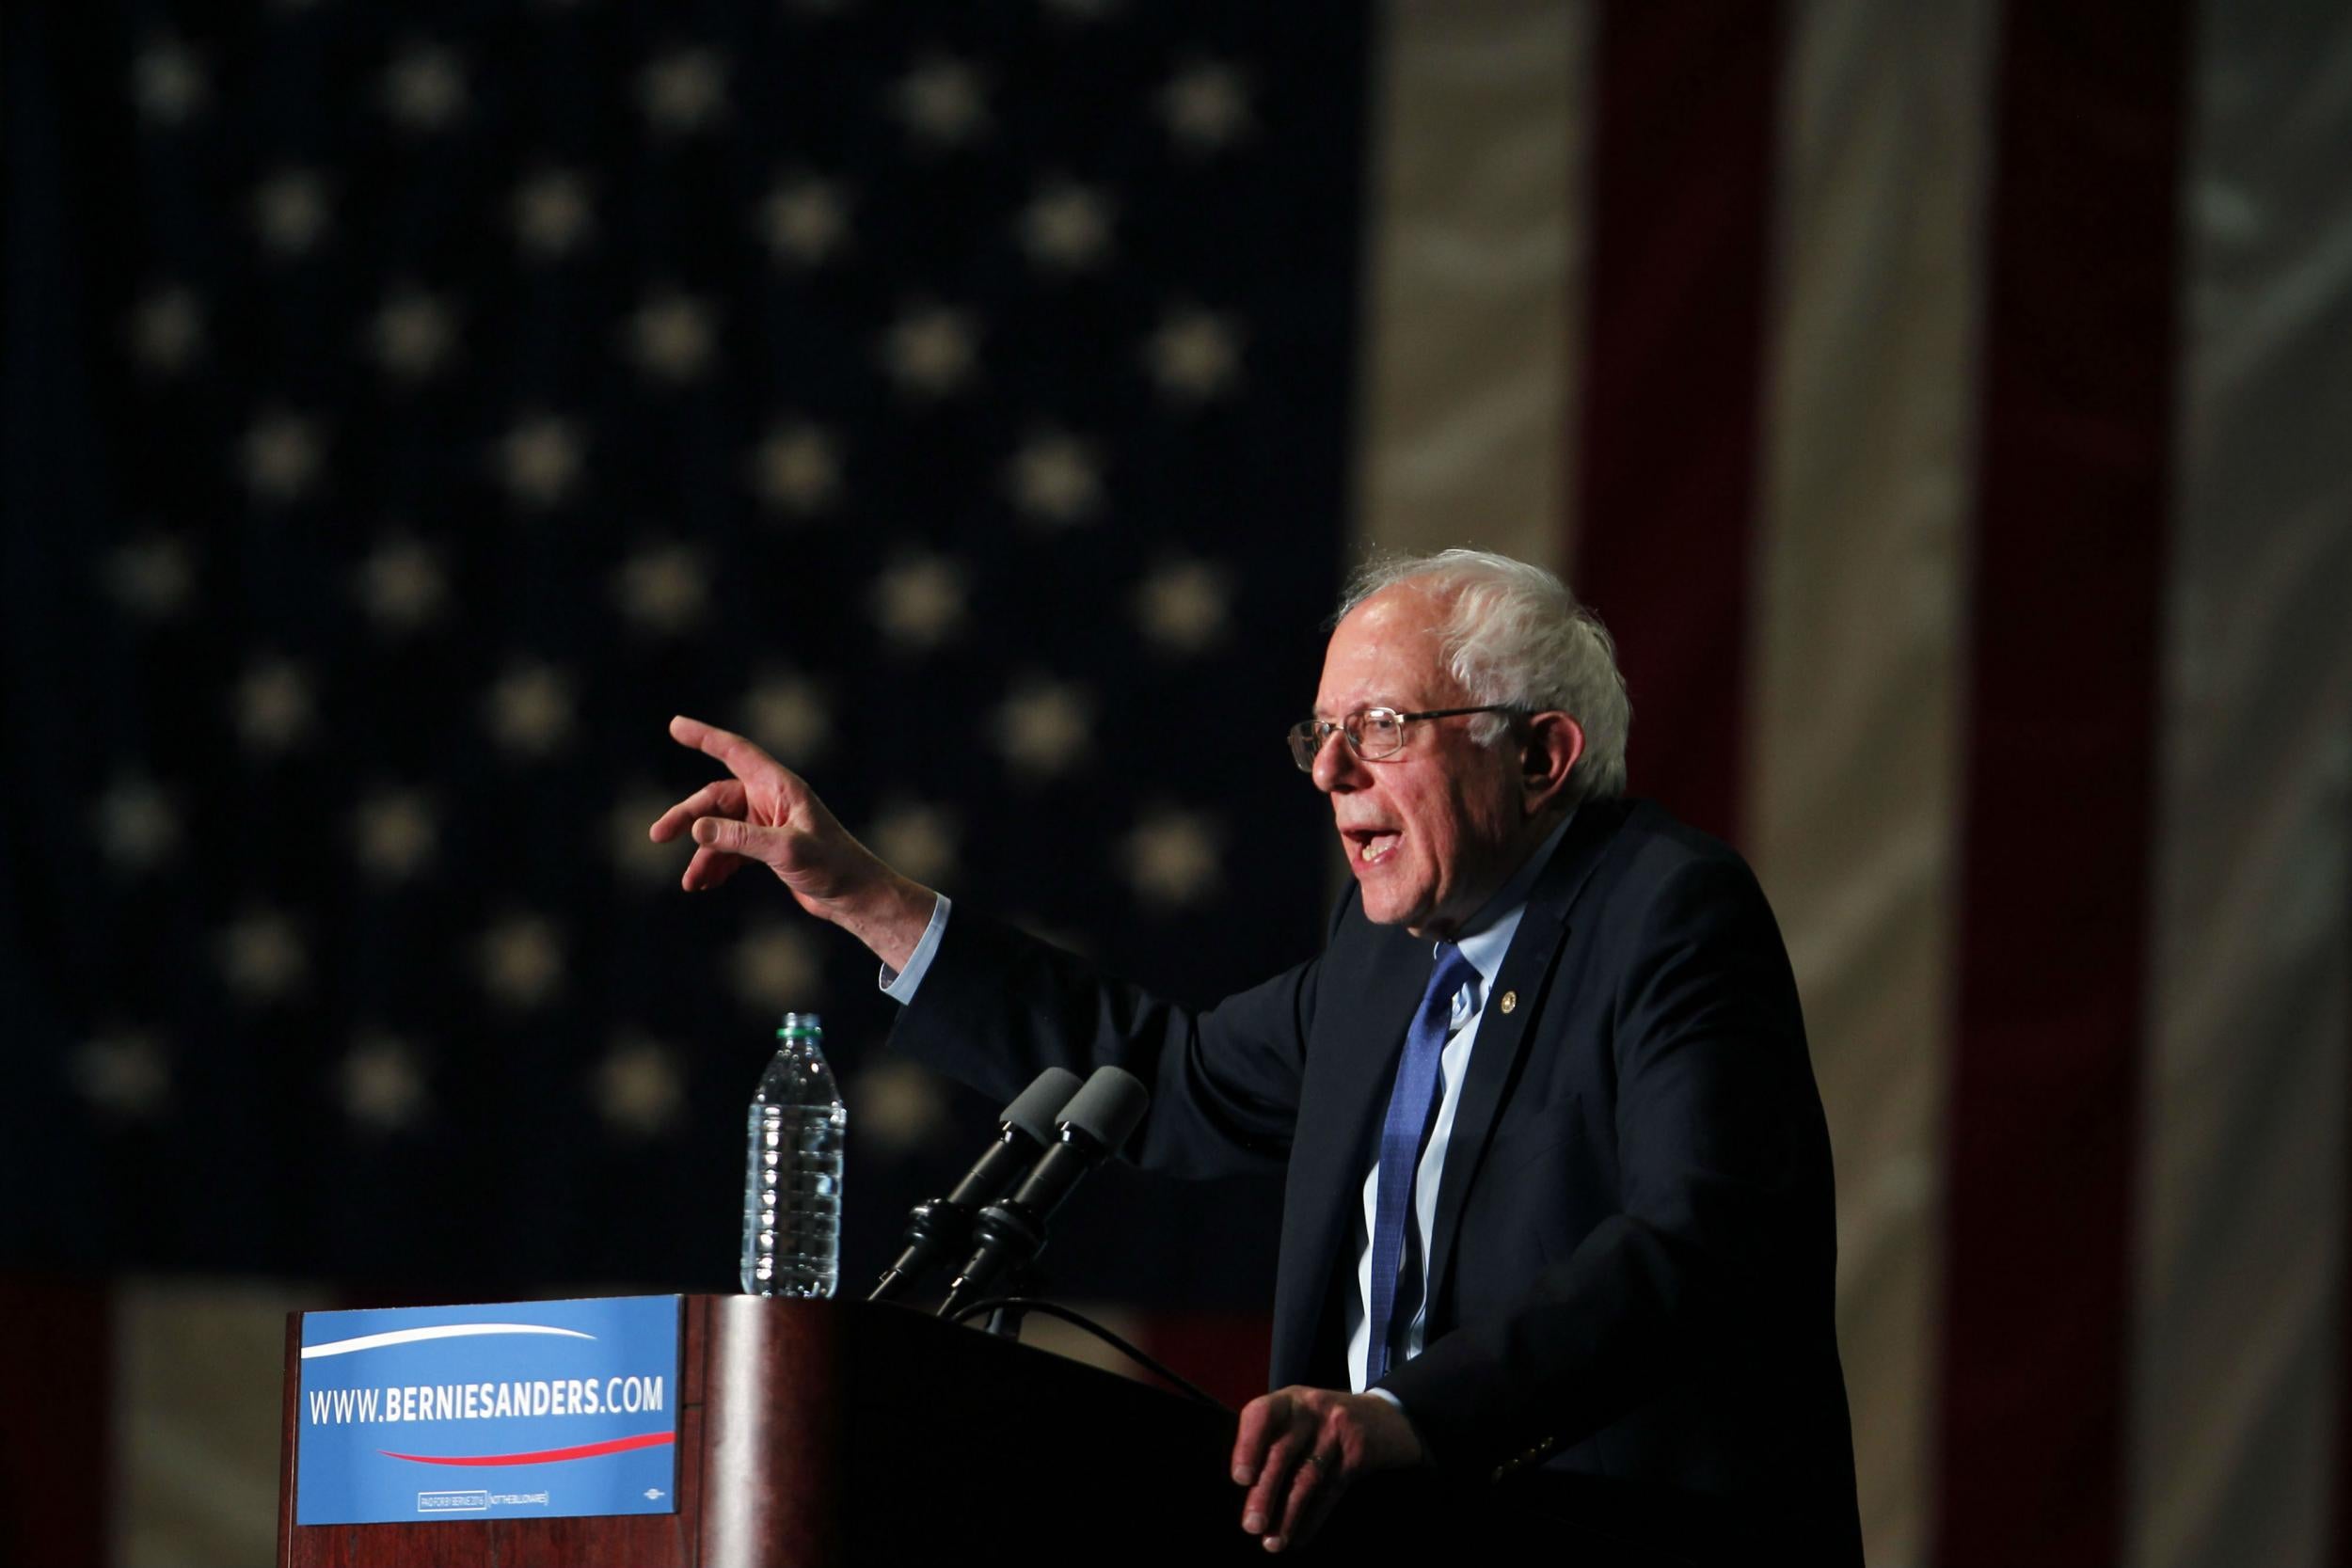 Bernie Sanders has vowed to continue his campaign